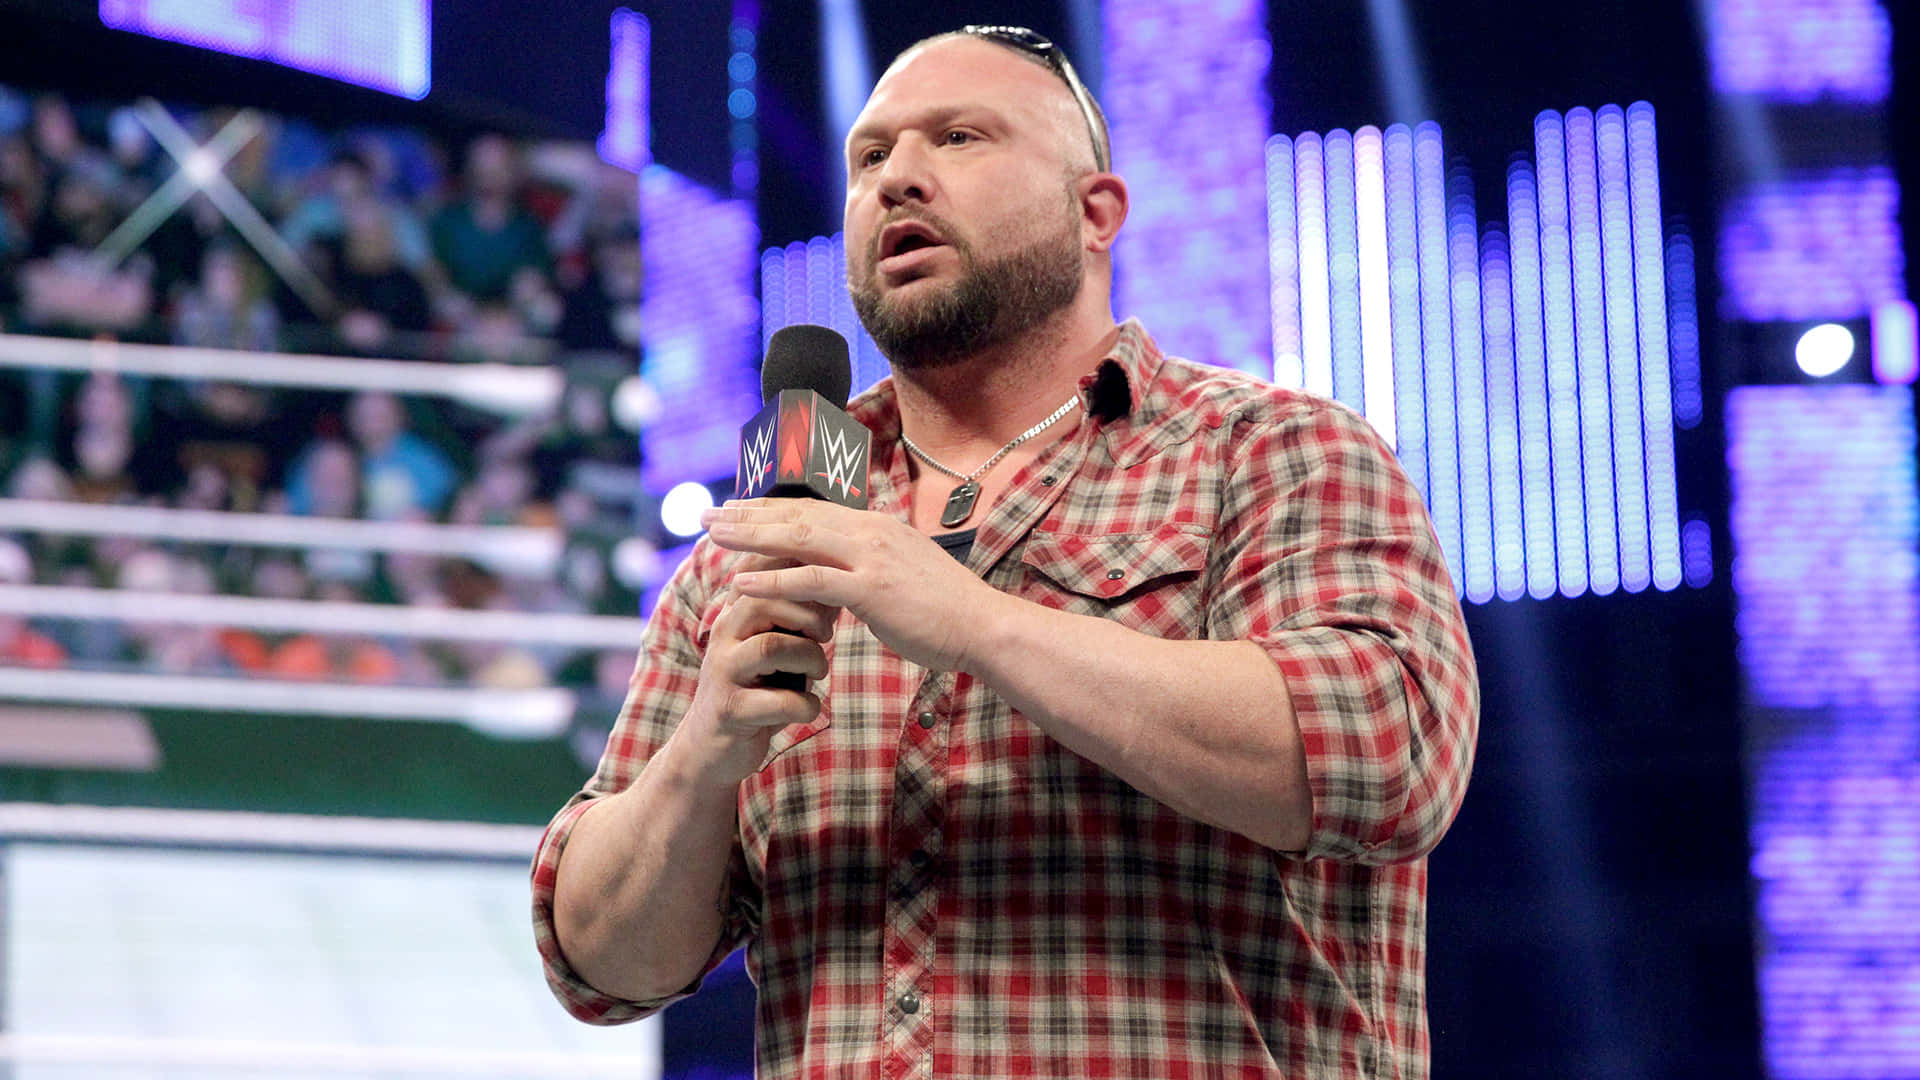 Wwe Microphone Bubba Ray Dudley Wallpaper